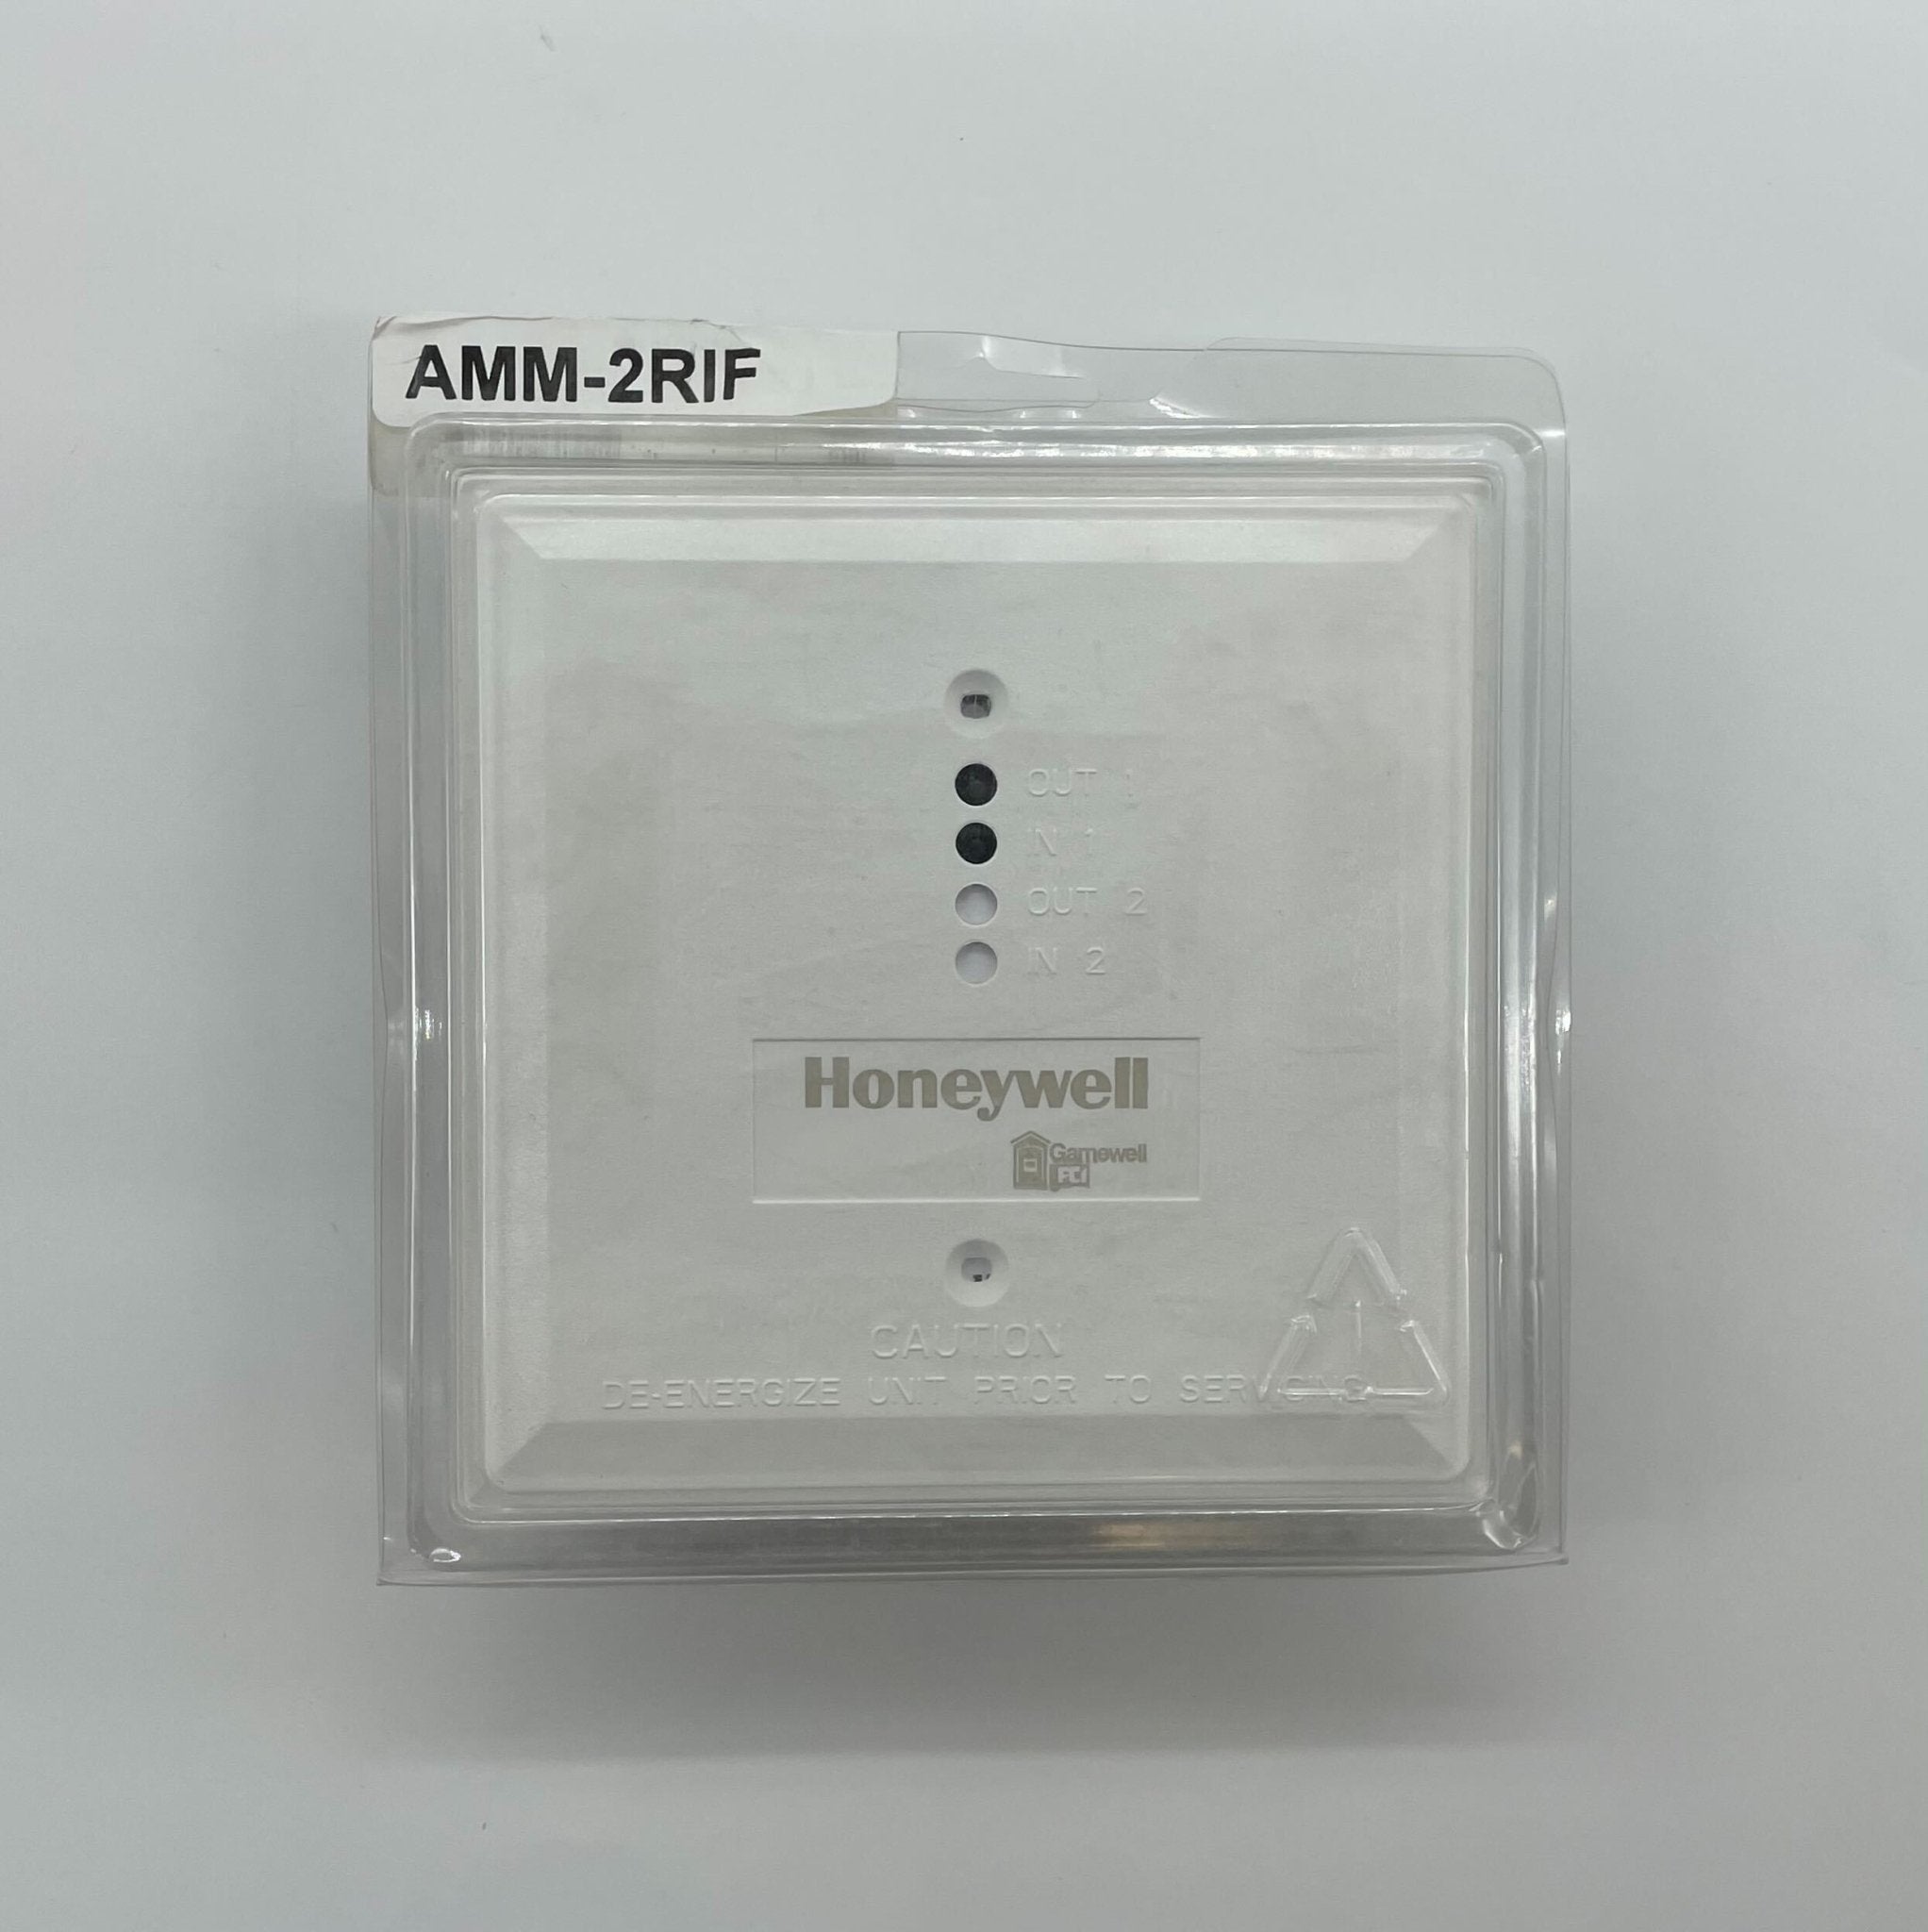 Gamewell-FCI AMM-2RIF - The Fire Alarm Supplier